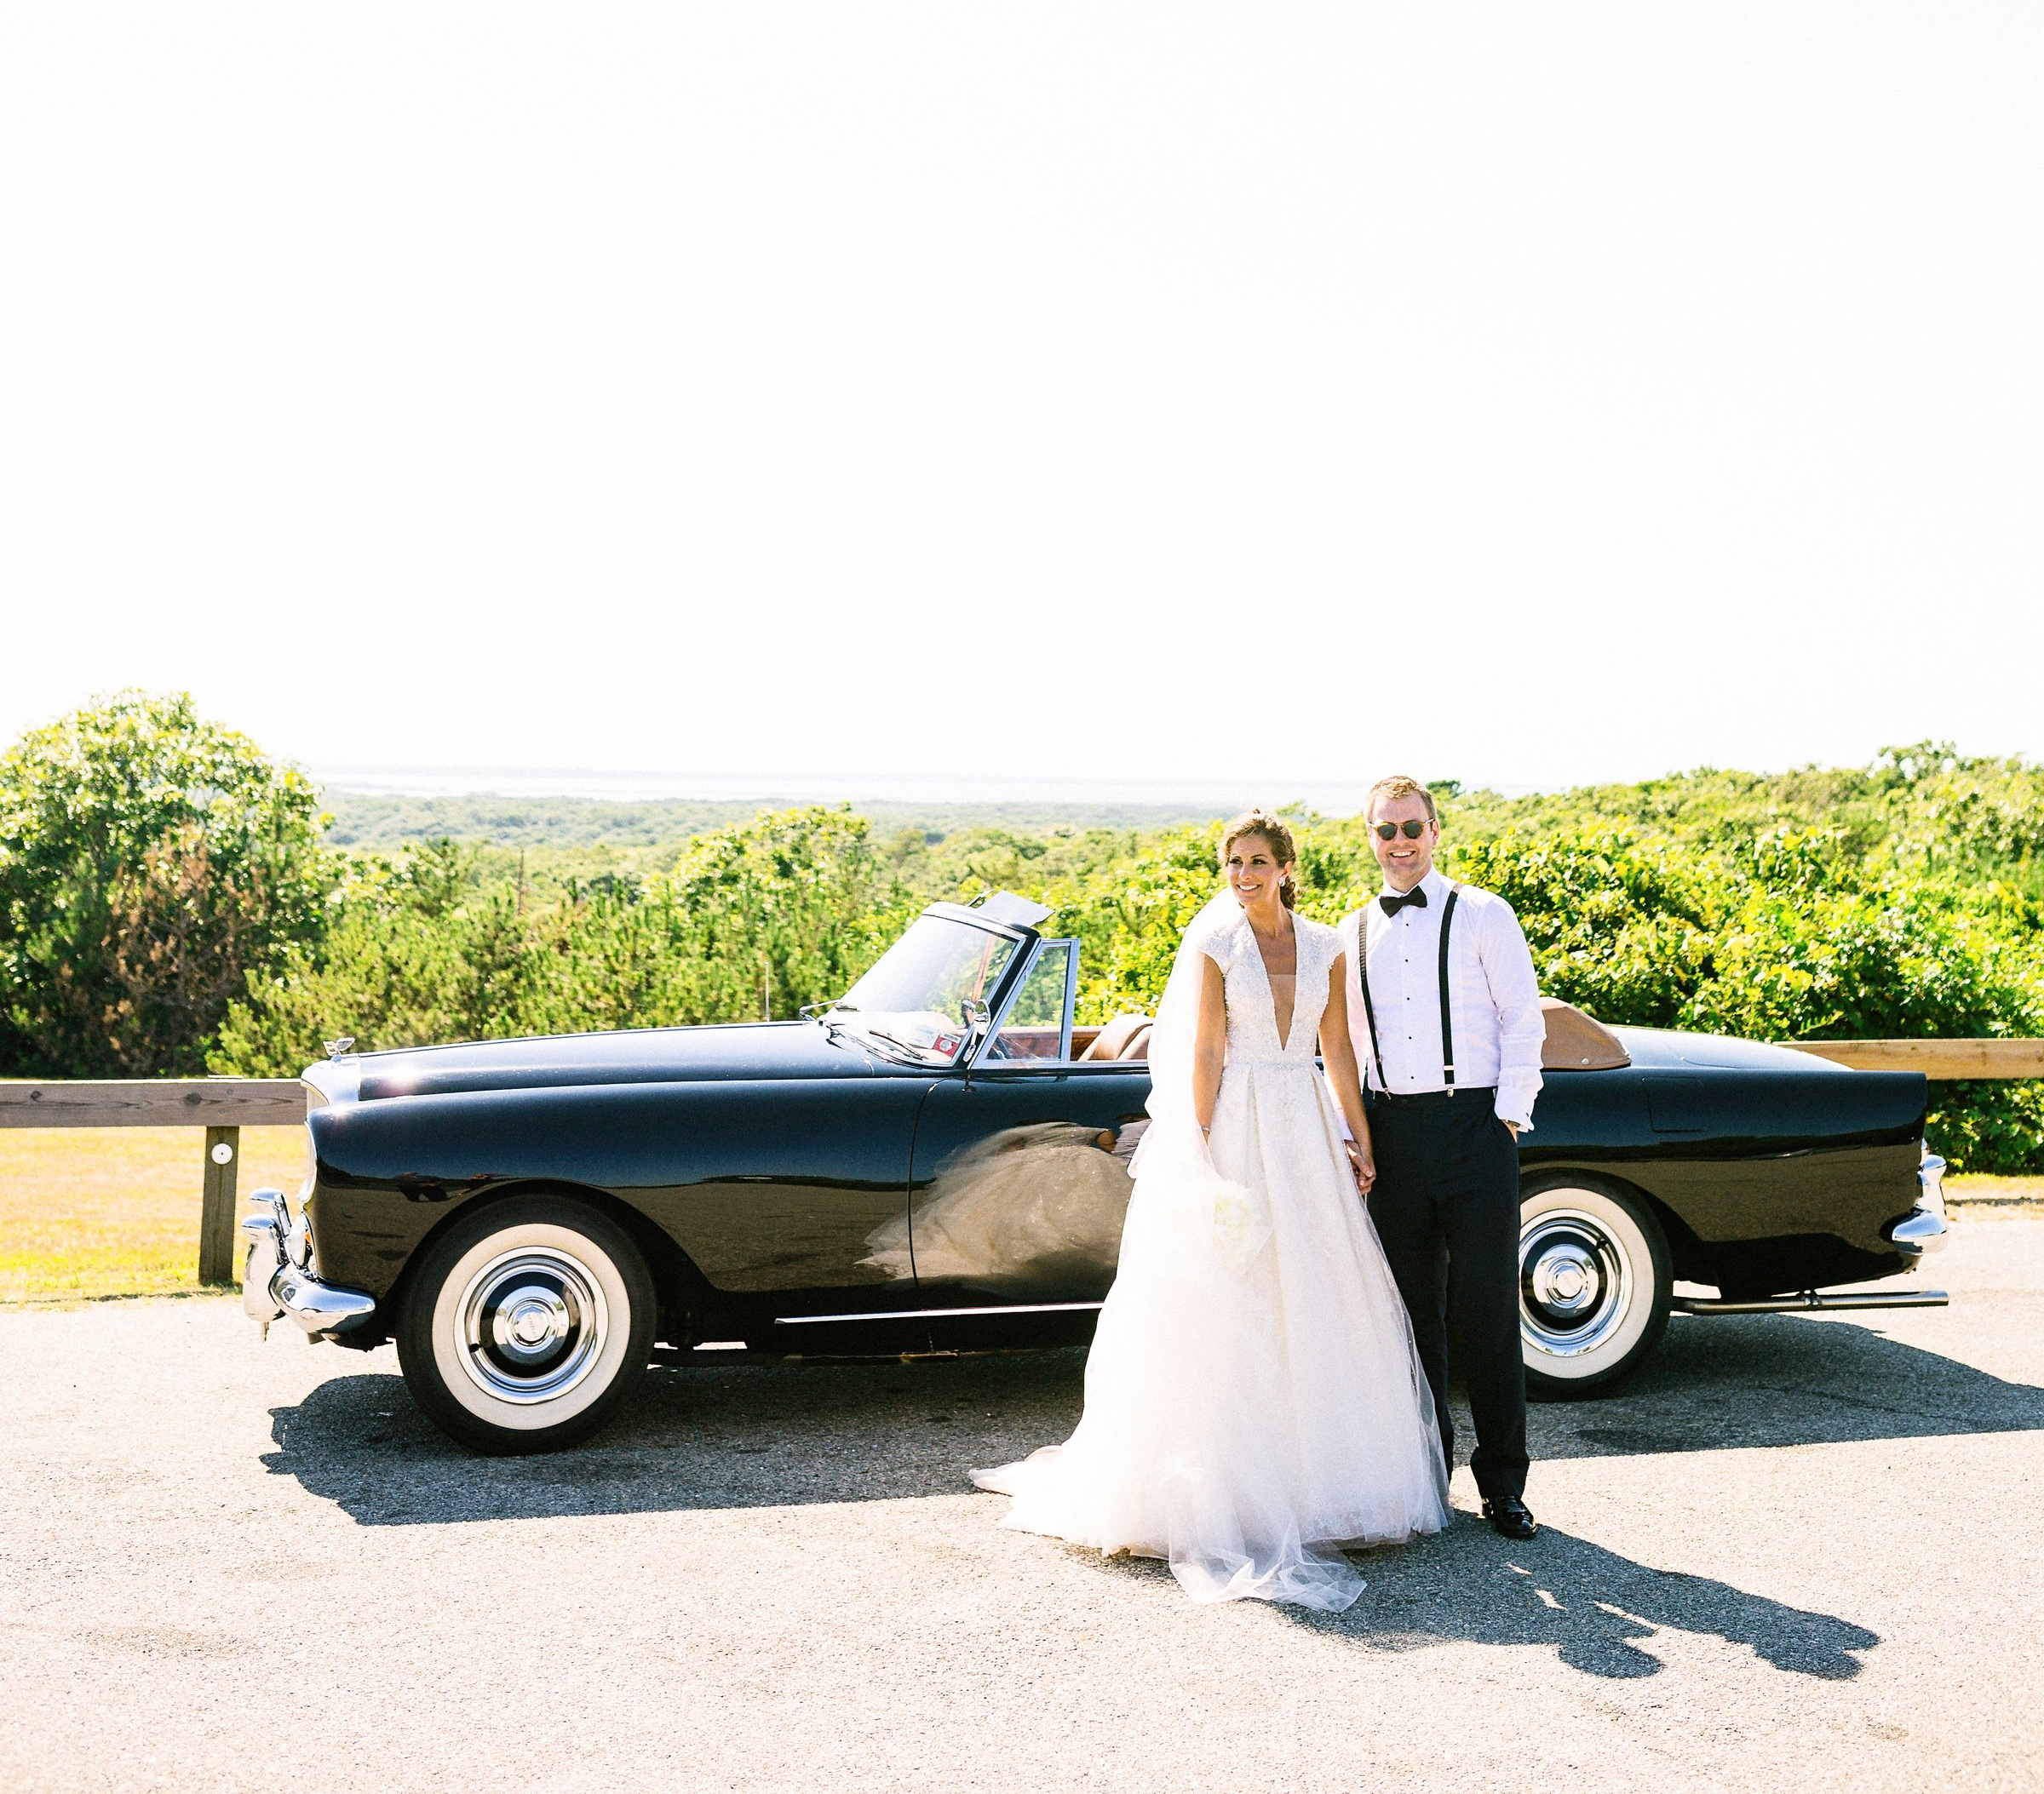 Bride and groom standing in front of black convertible with beach and shoreline in background.